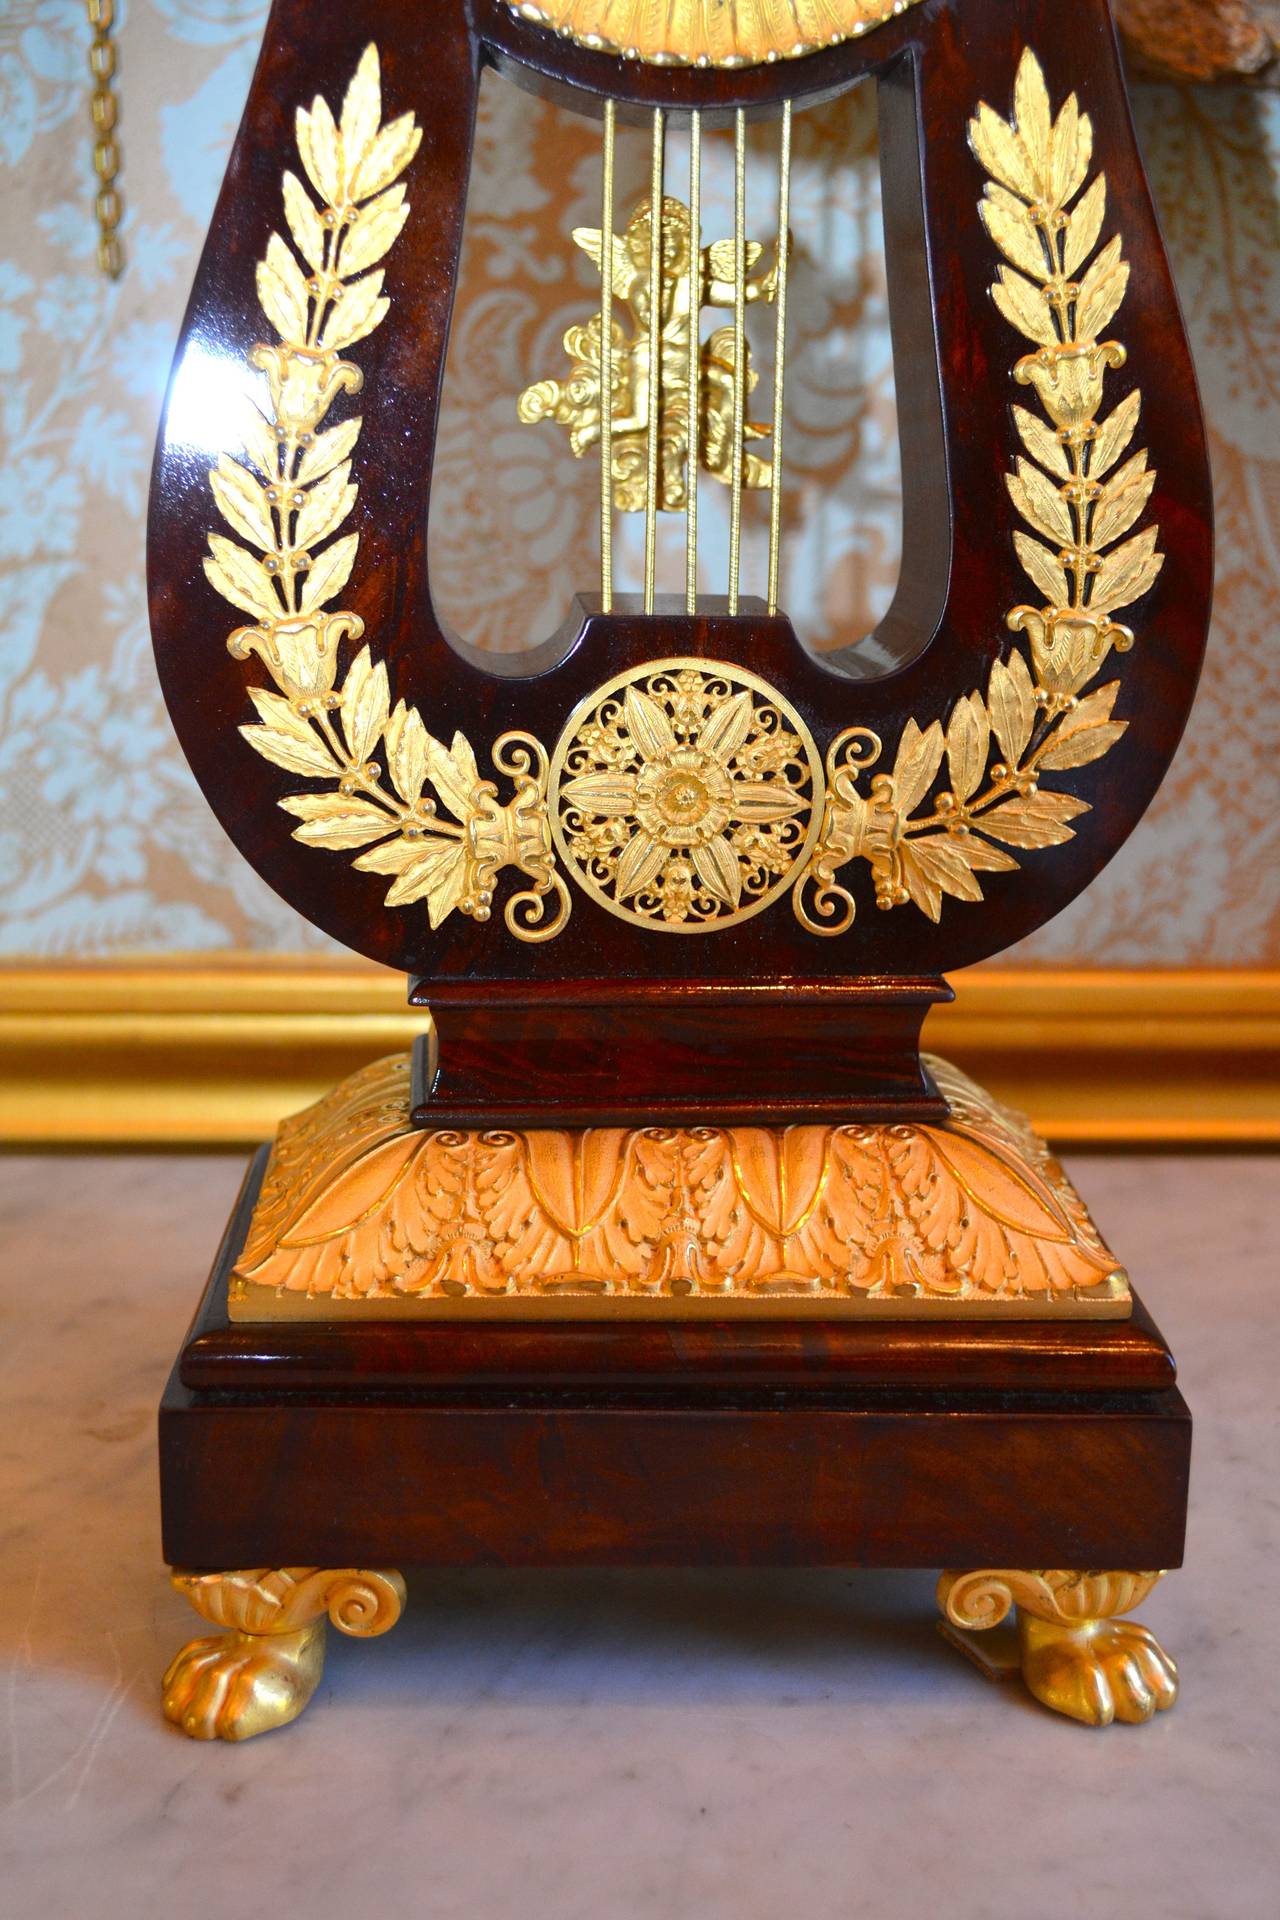 A very fine quality French Restauration period mantel clock in the shape of a lyre; the case in well figured Honduras mahogany richly inlaid with finely chased gilded bronze mounts having the original mercury gilding. The pendulum bob in the shape